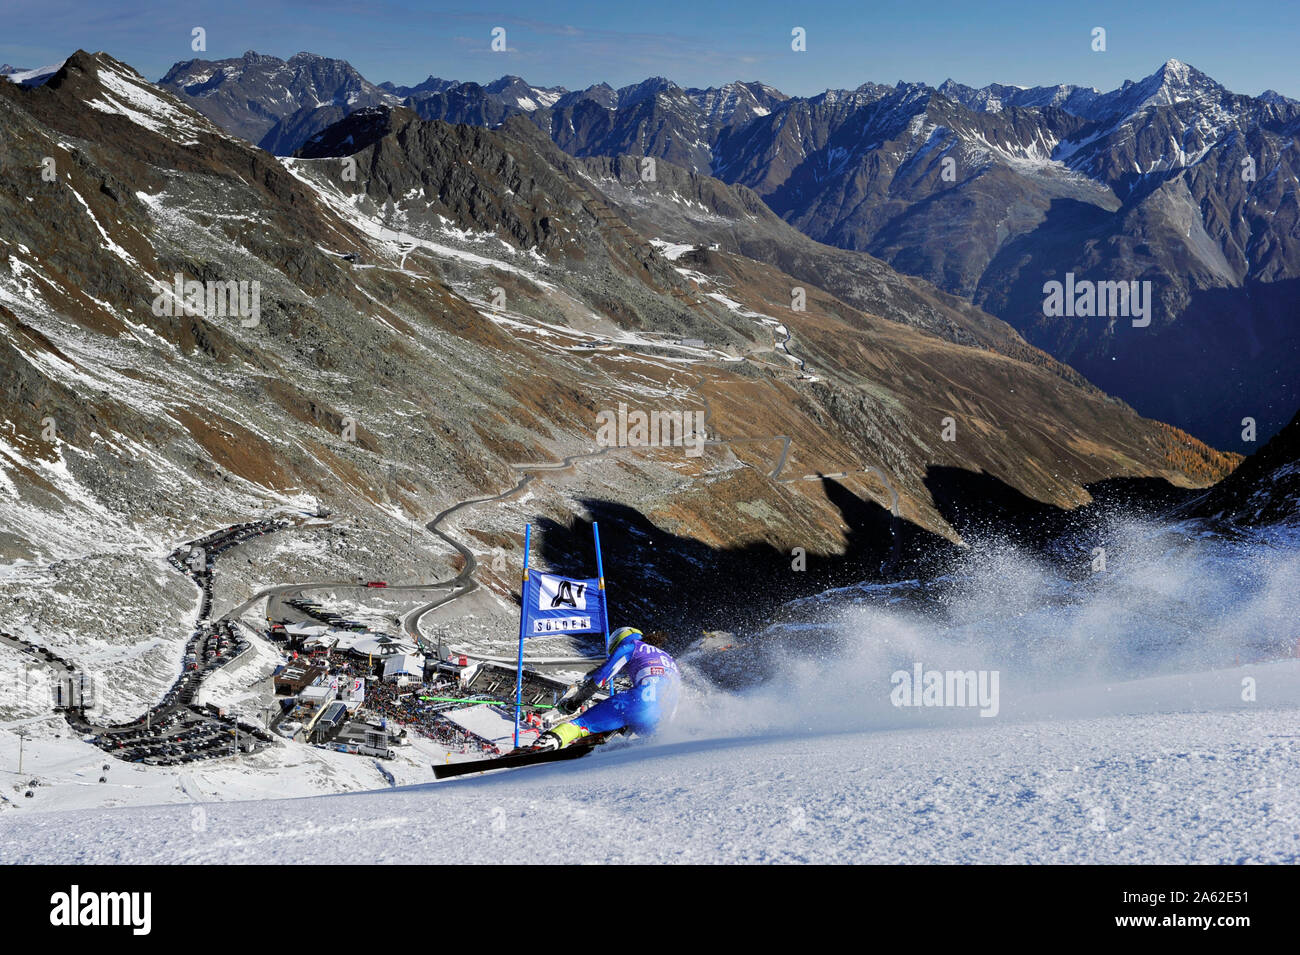 Preview of the Alpine Ski World Cup in Soelden/Tyrol. Image: general, ski racer, ski racer, skier in front of alpine panorama, mountains, mountains.Feature. Alpine Skiing, Rettenbachferner, Glacier in Oetztal., Rettenbach Glacier, Soelden, Austria, season 2013/2014, 13/14. | Usage worldwide Stock Photo